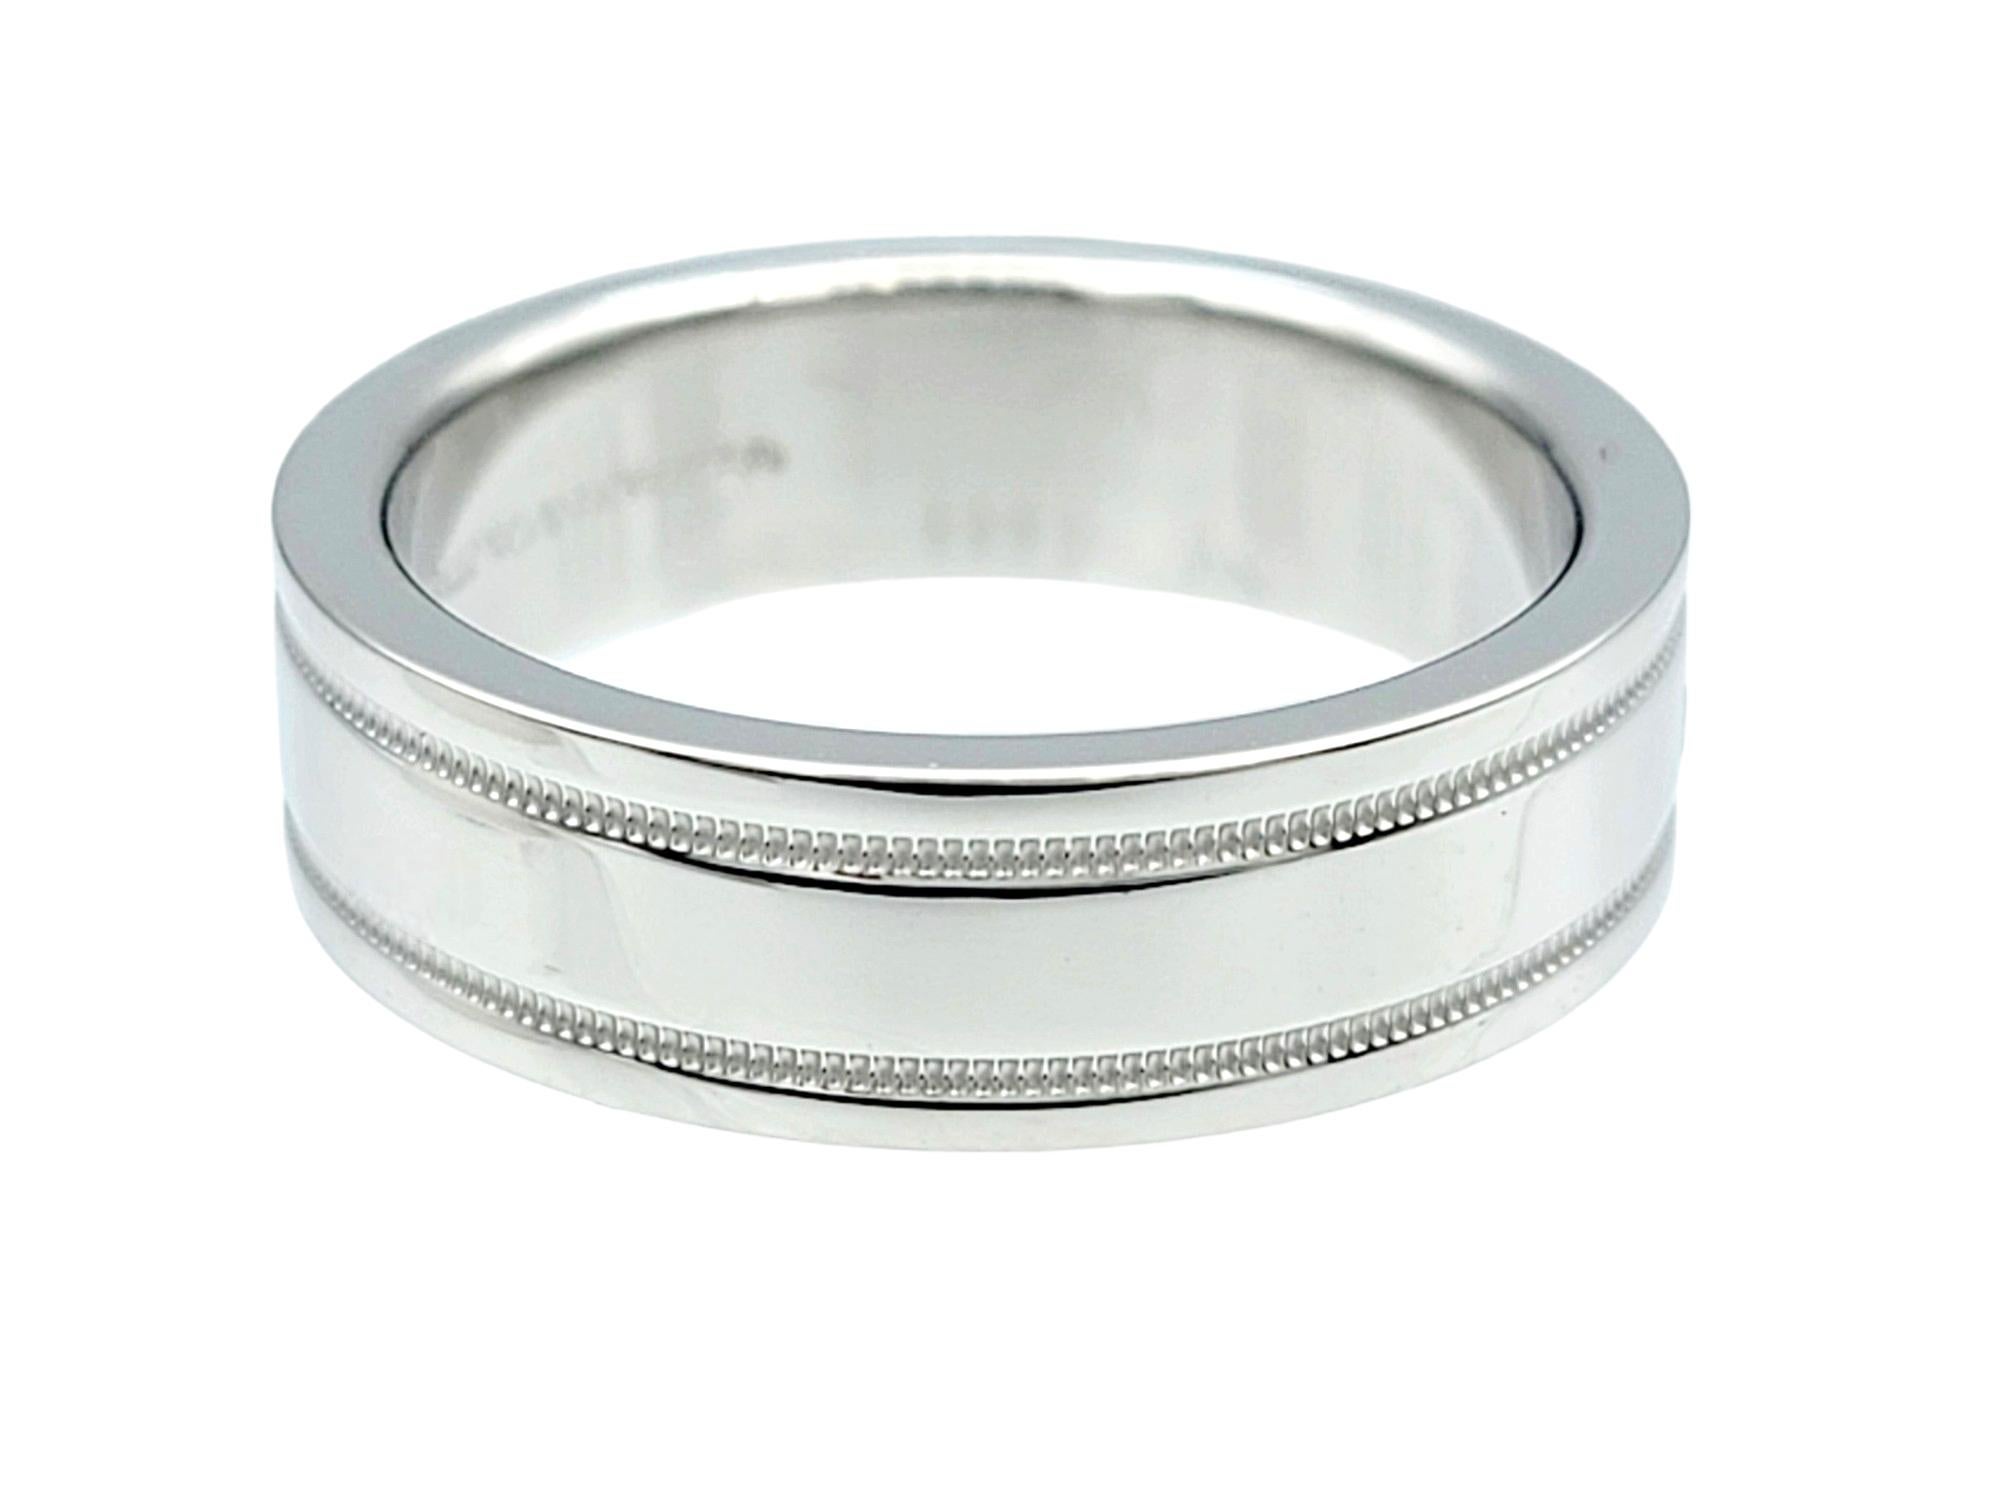 Tiffany & Co. 'Together' Double Milgrain Polished Platinum Wedding Band Ring In Good Condition For Sale In Scottsdale, AZ